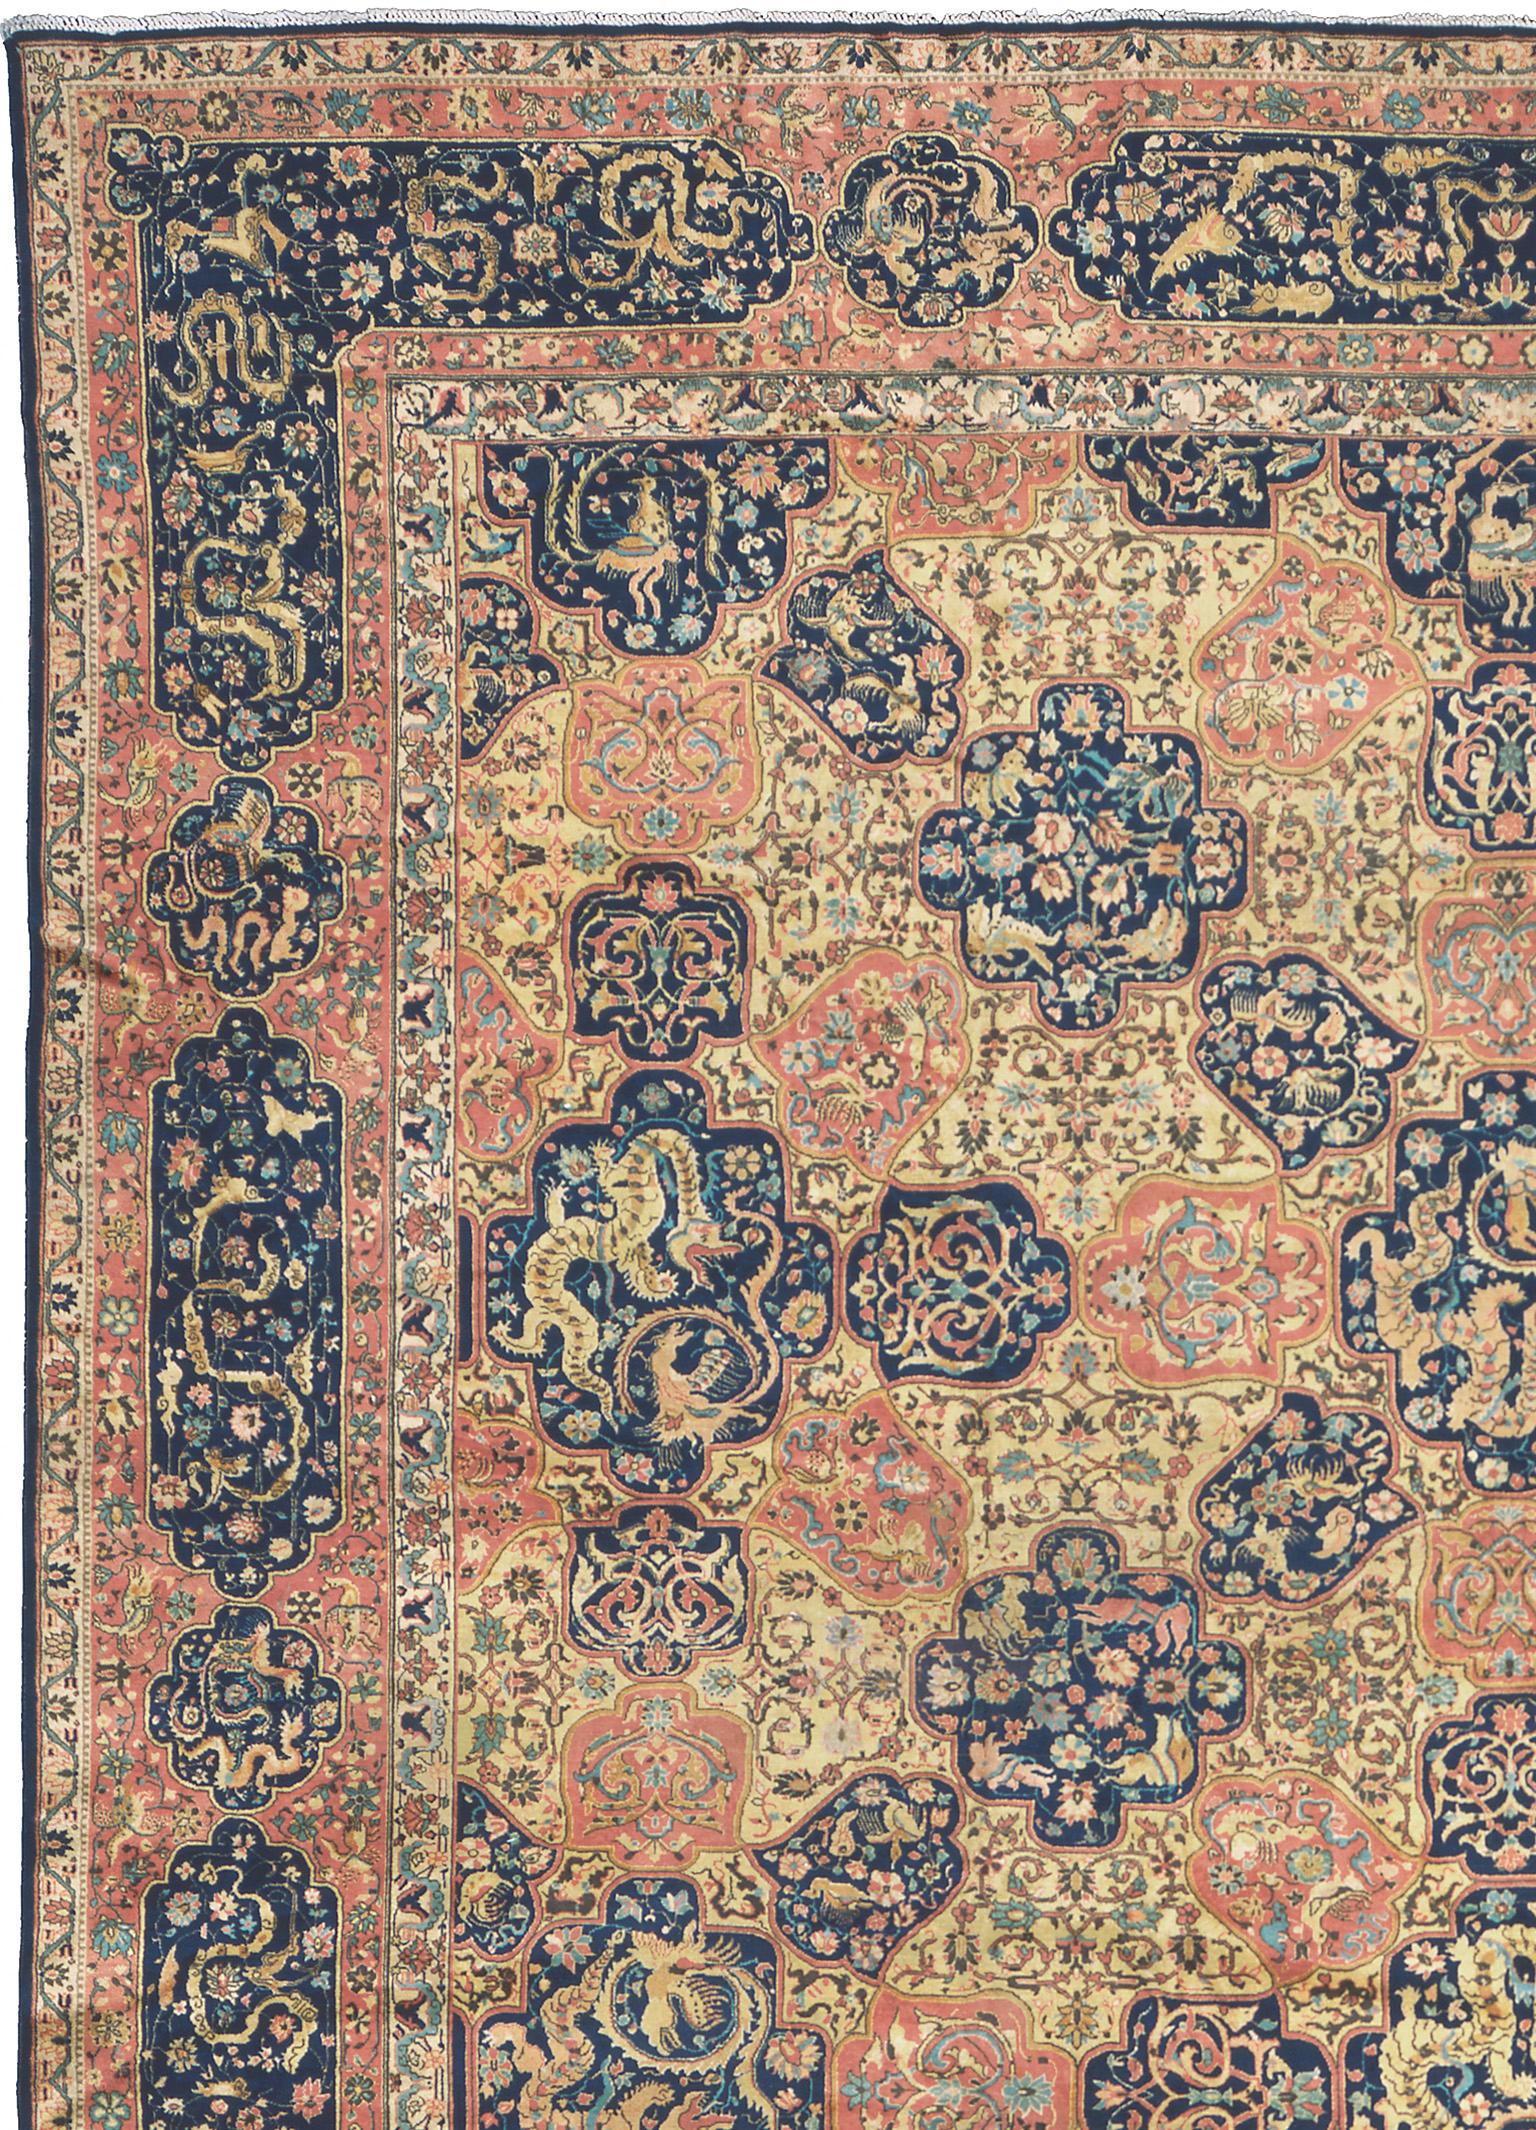 Early 20th Century Indo-Persian Rug In Good Condition For Sale In New York, NY